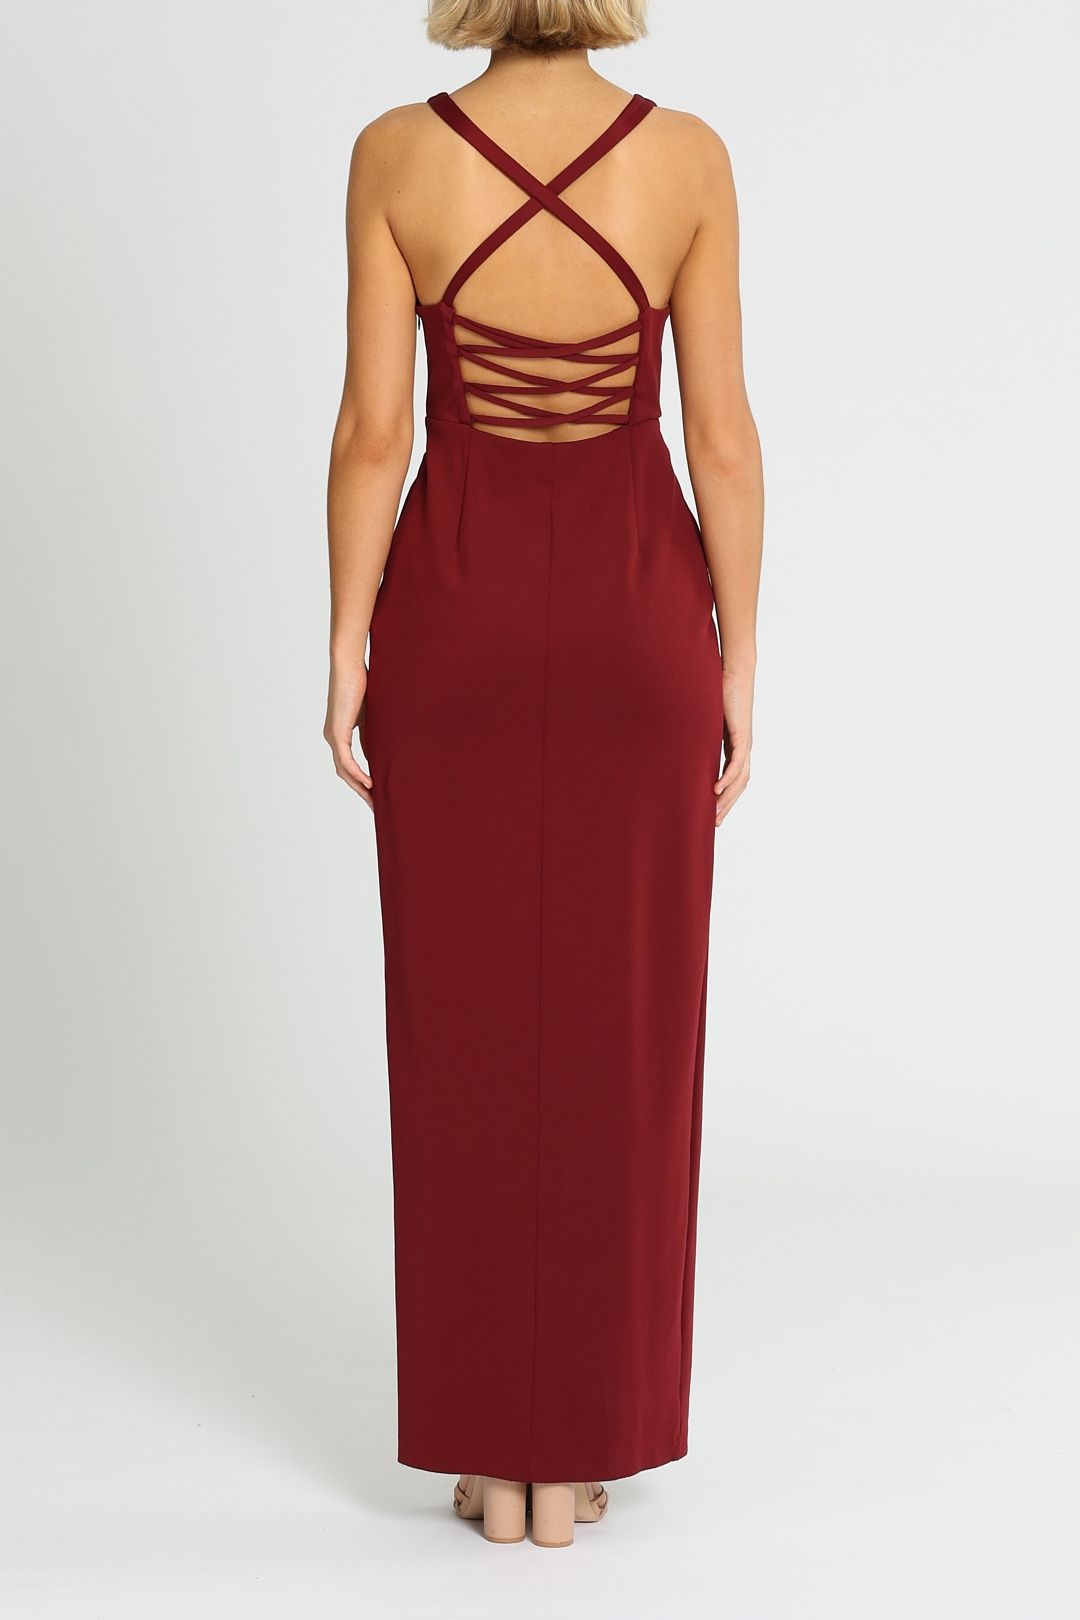 Grace and Hart Gold Rush Neon Gown in Wine Red Open Back